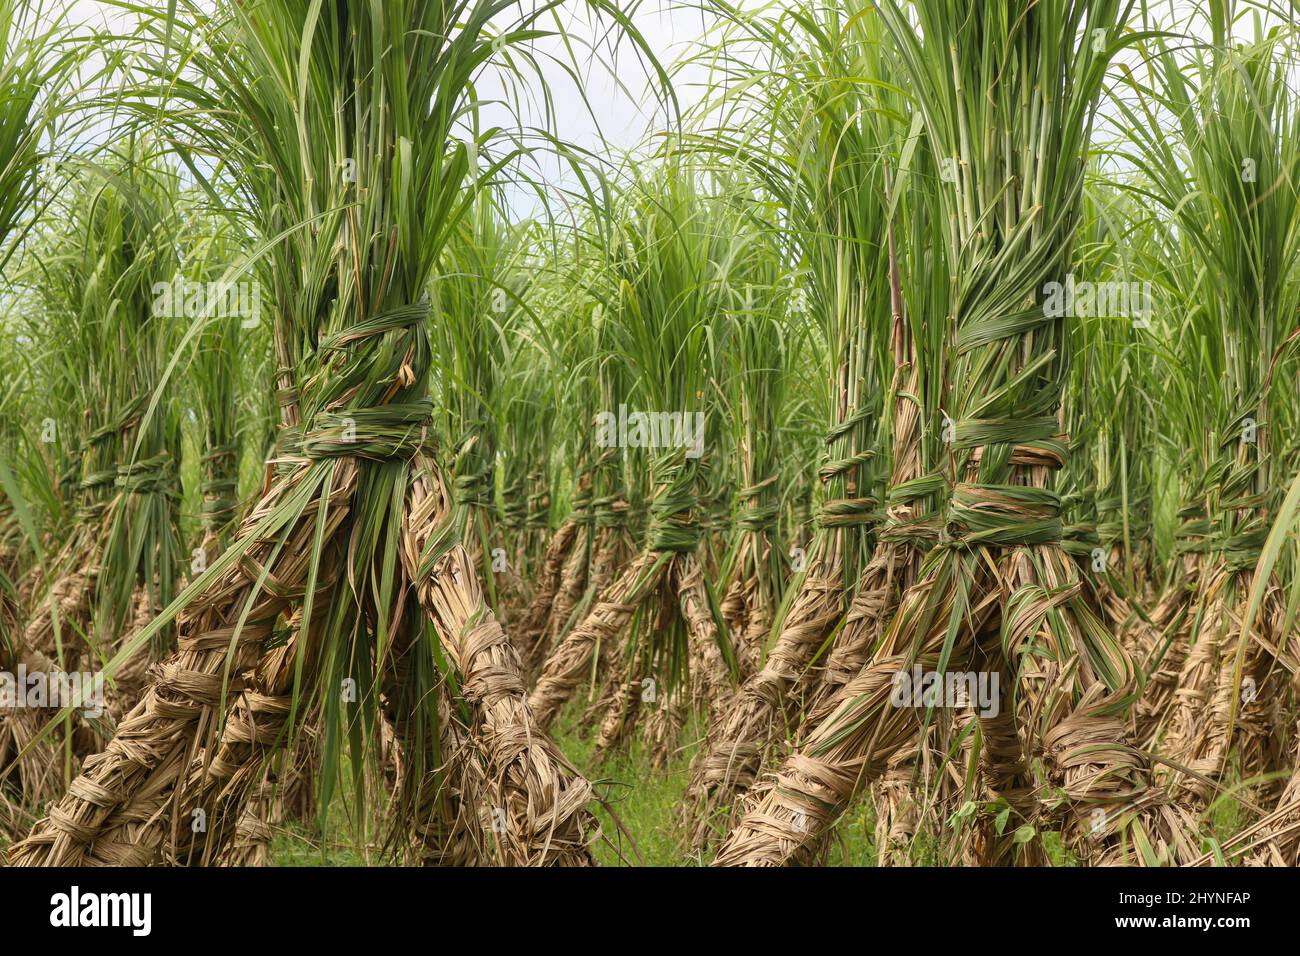 Sugarcane field. Row upon row of sugarcane. Delicious sugar is made from sugarcane. Stock Photo